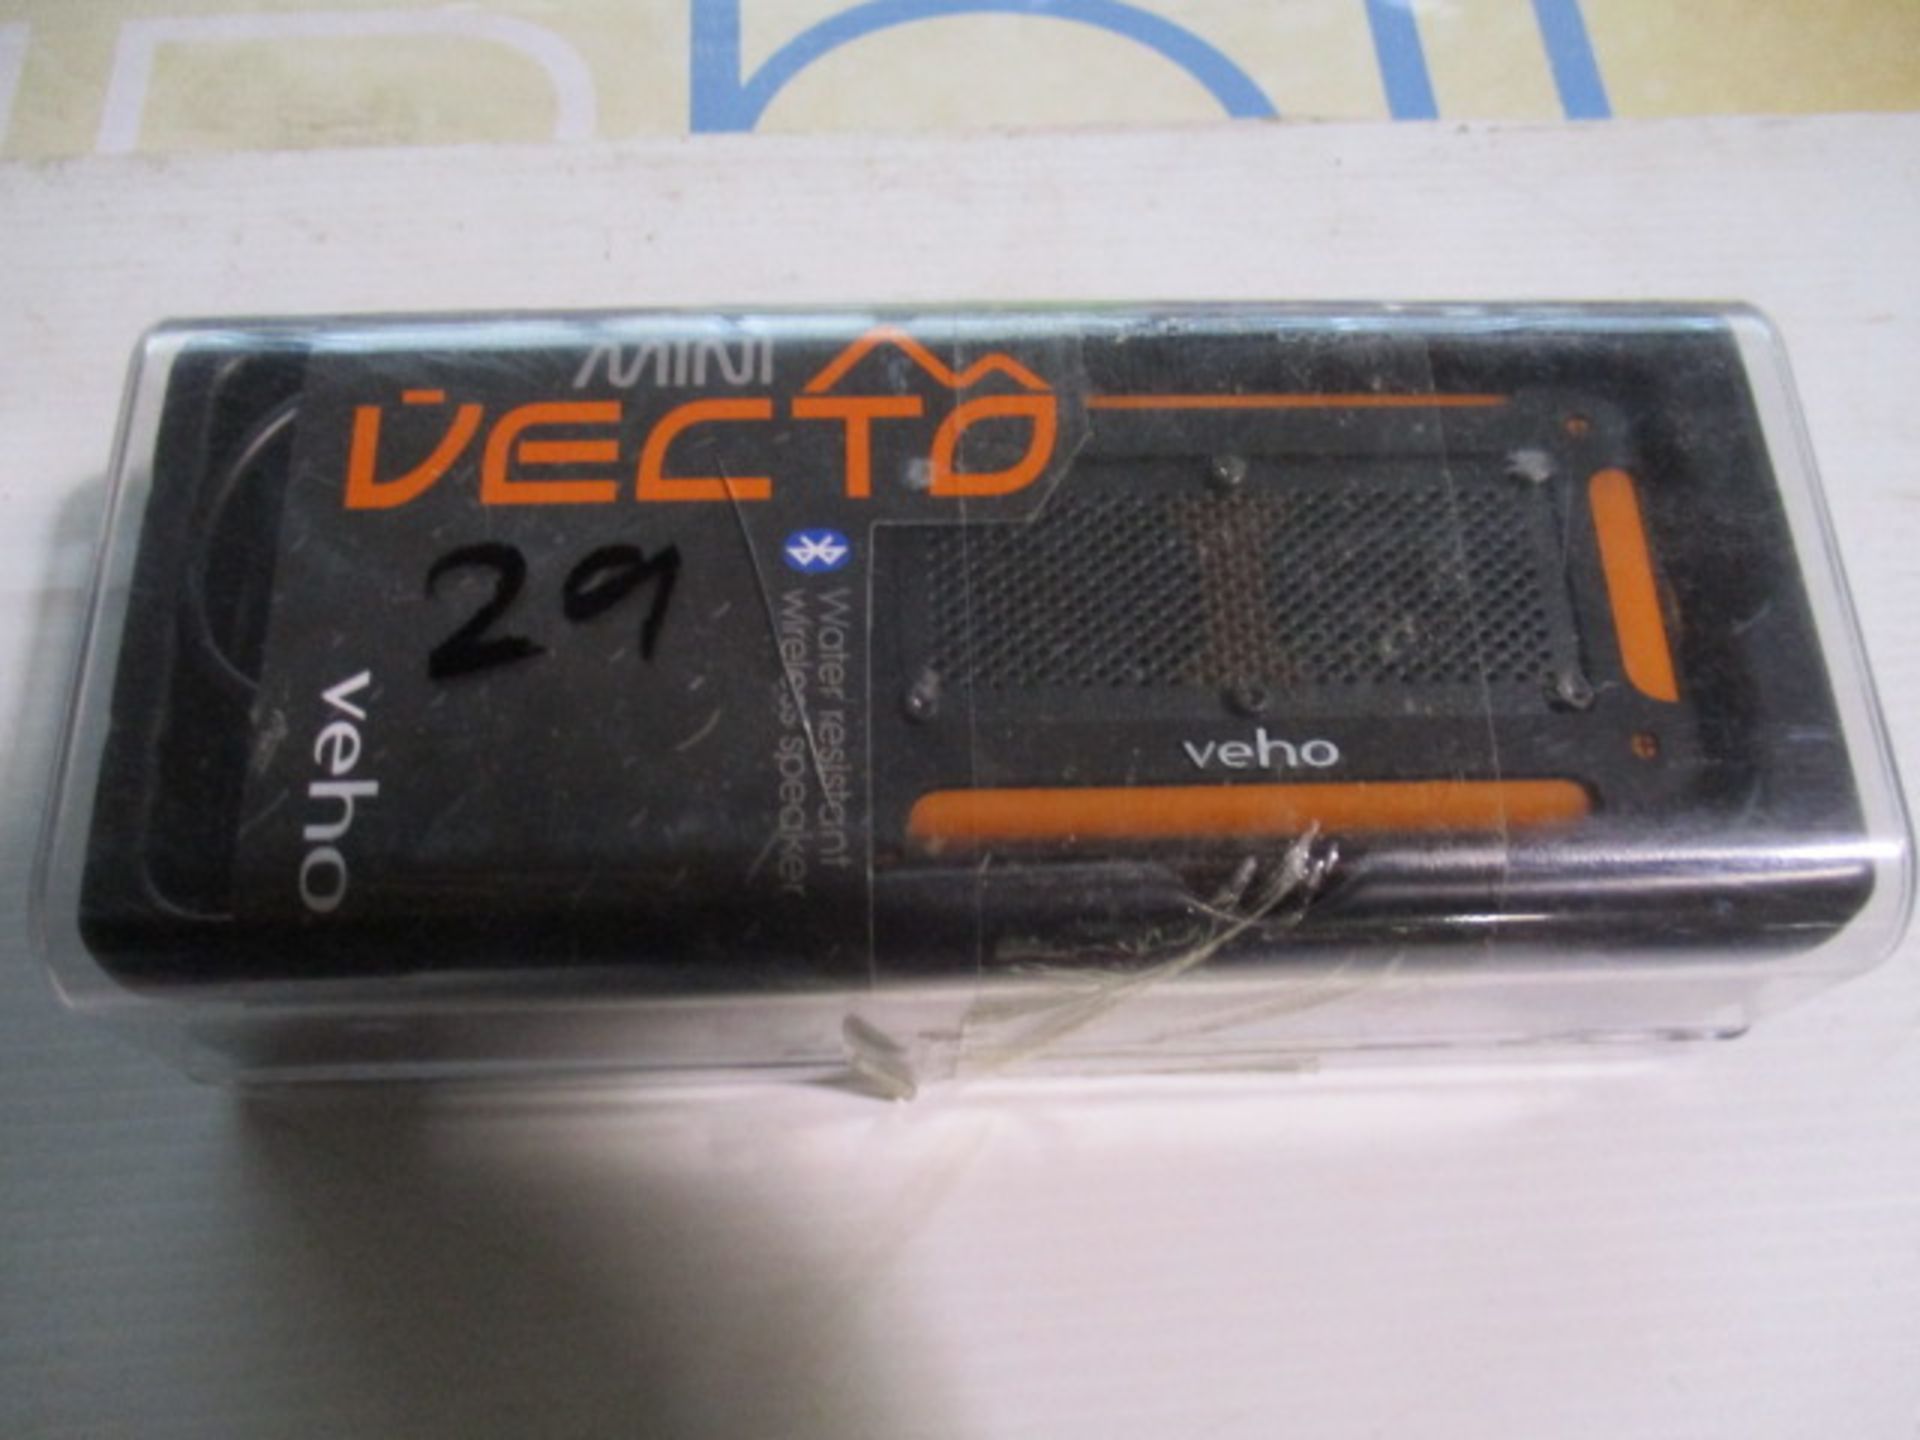 Veho Mini Vecto wireless water resistant/splashproof speaker boxed and unchecked